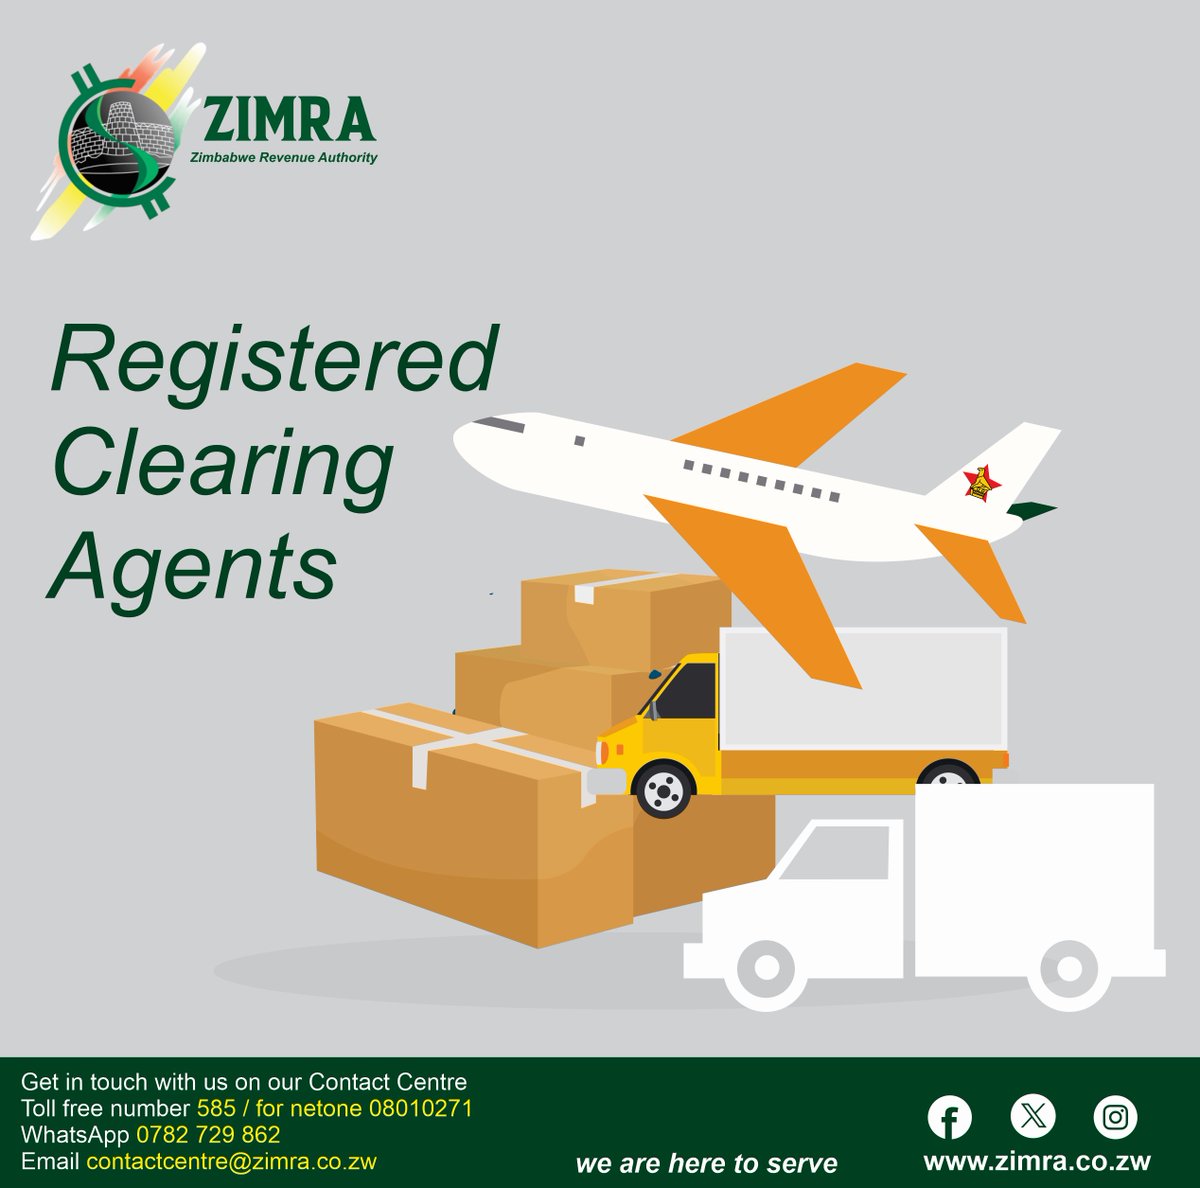 List of registered Clearing Agents #TradeFacilitation #CustomsClearance zimra.co.zw/customs/forms?…